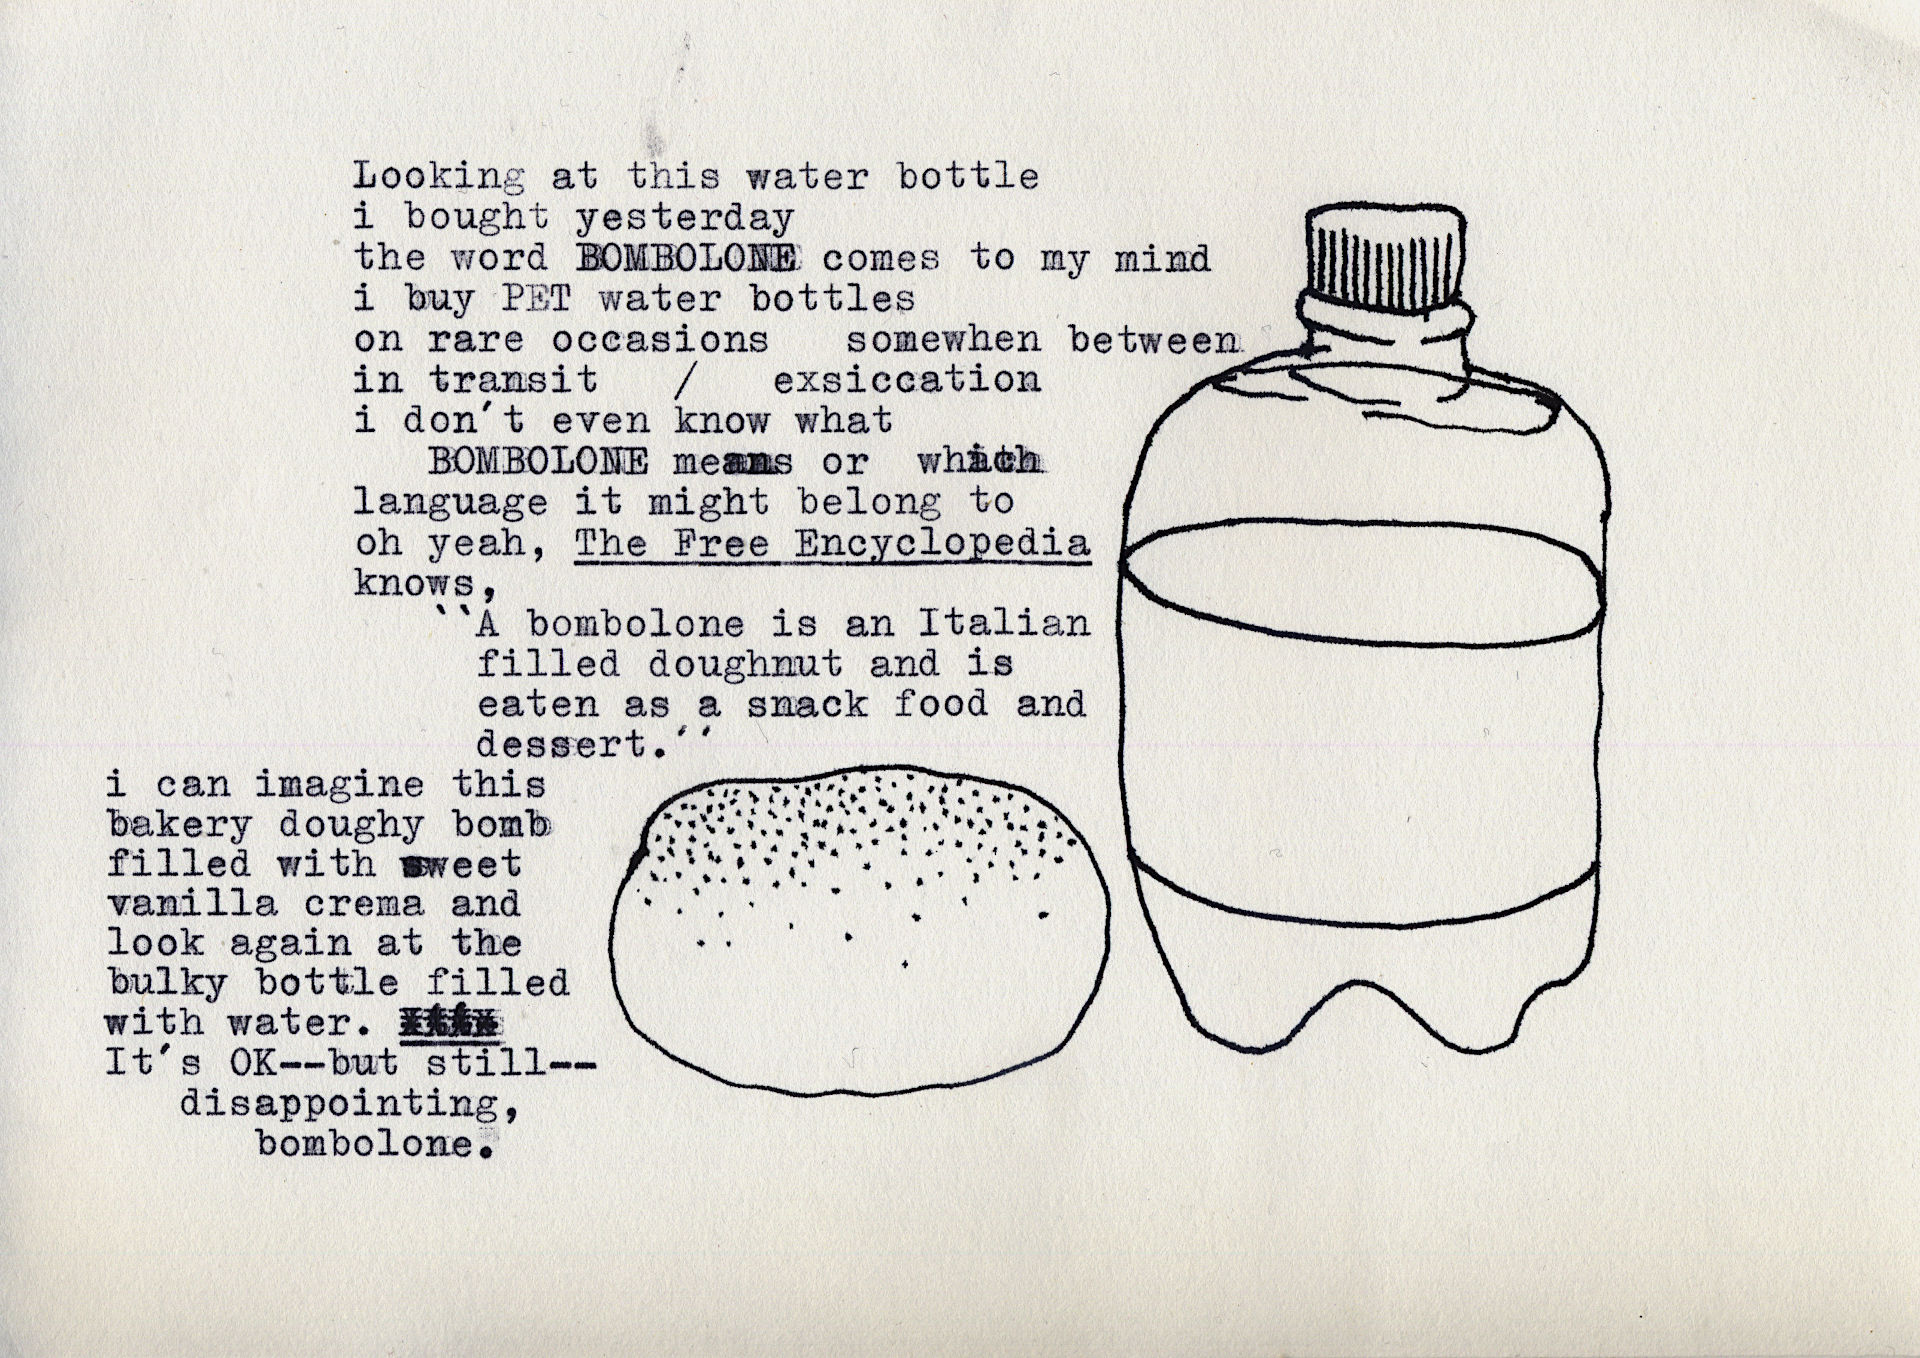 poem written with a typewriter and an ink drawing of a bulky small water bottle and a doughnut-like bakery bomb